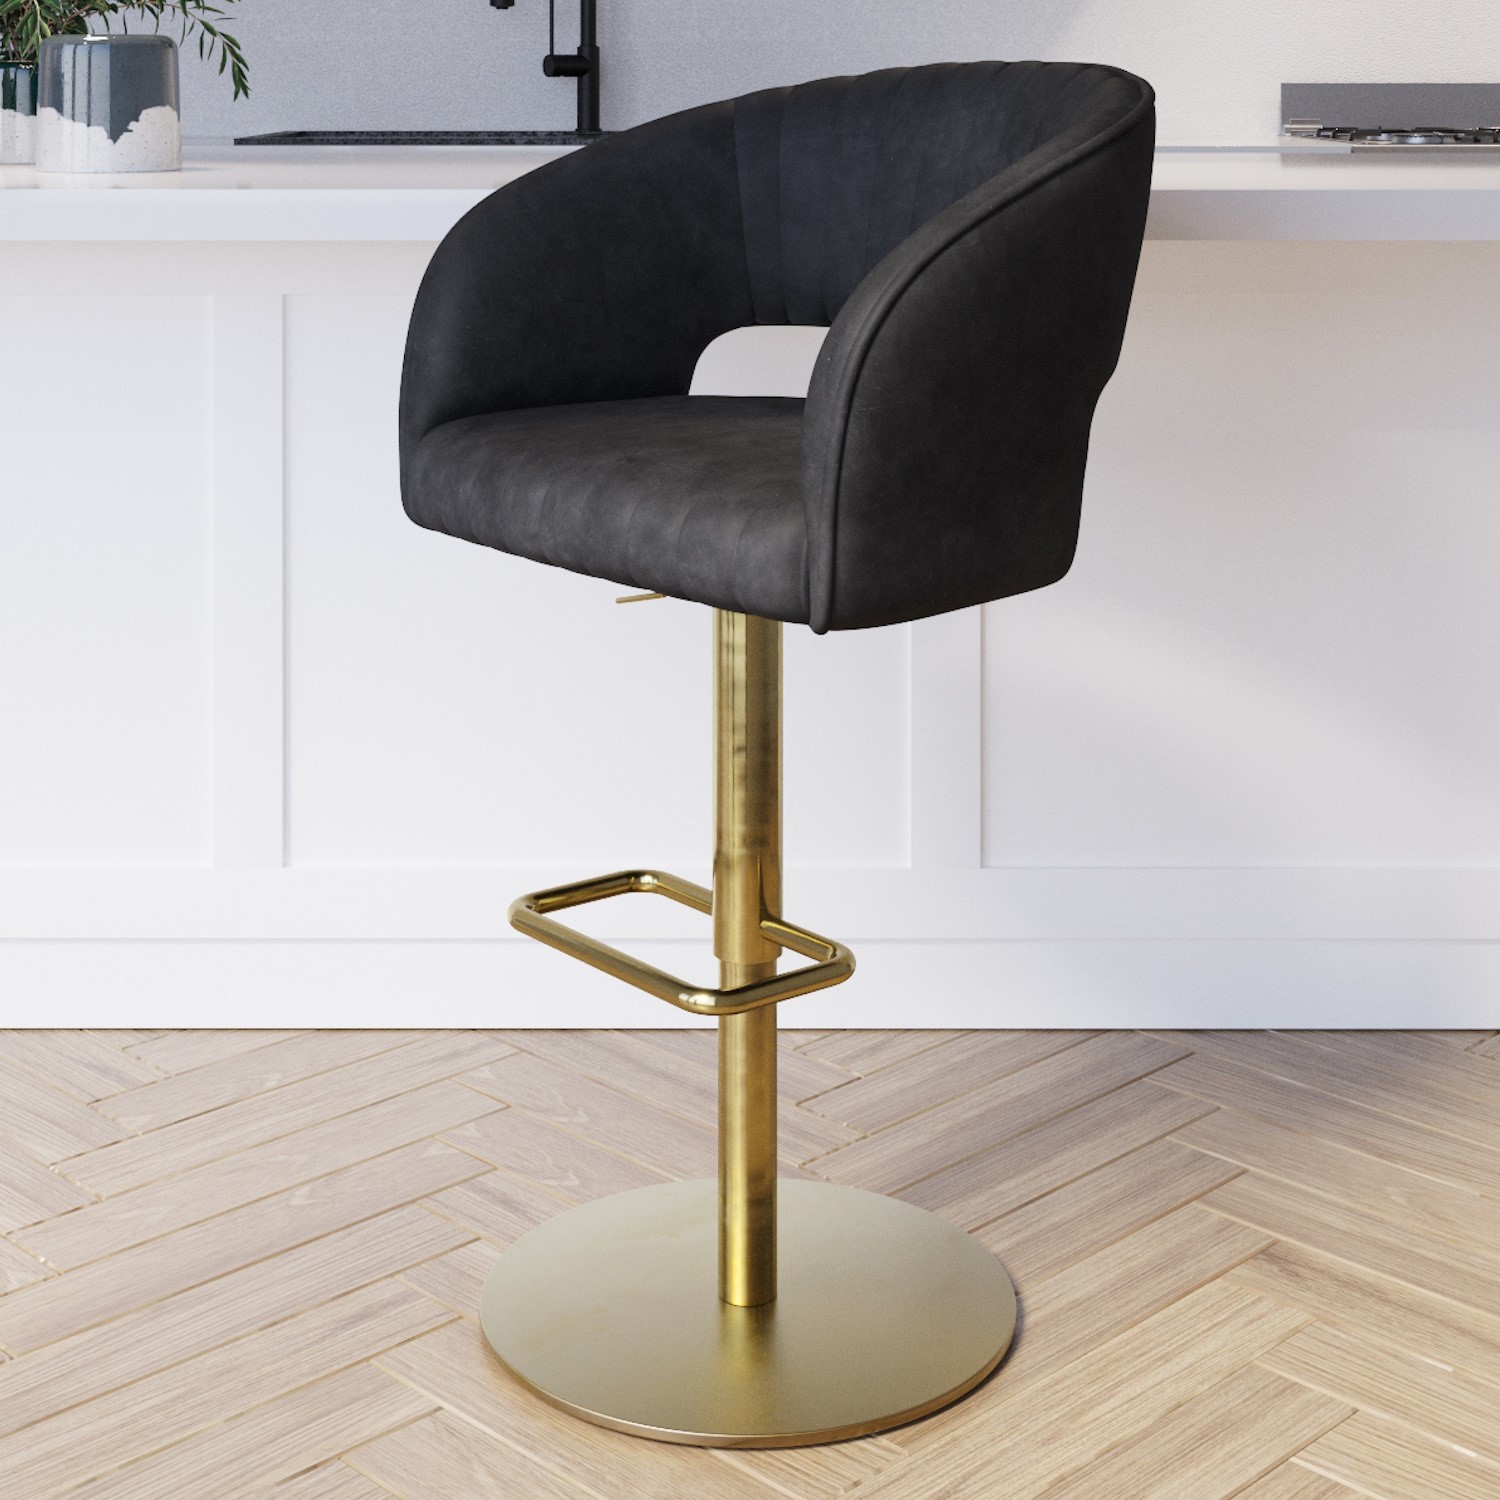 Photo of Curved black faux leather adjustable swivel bar stool with brass base - runa